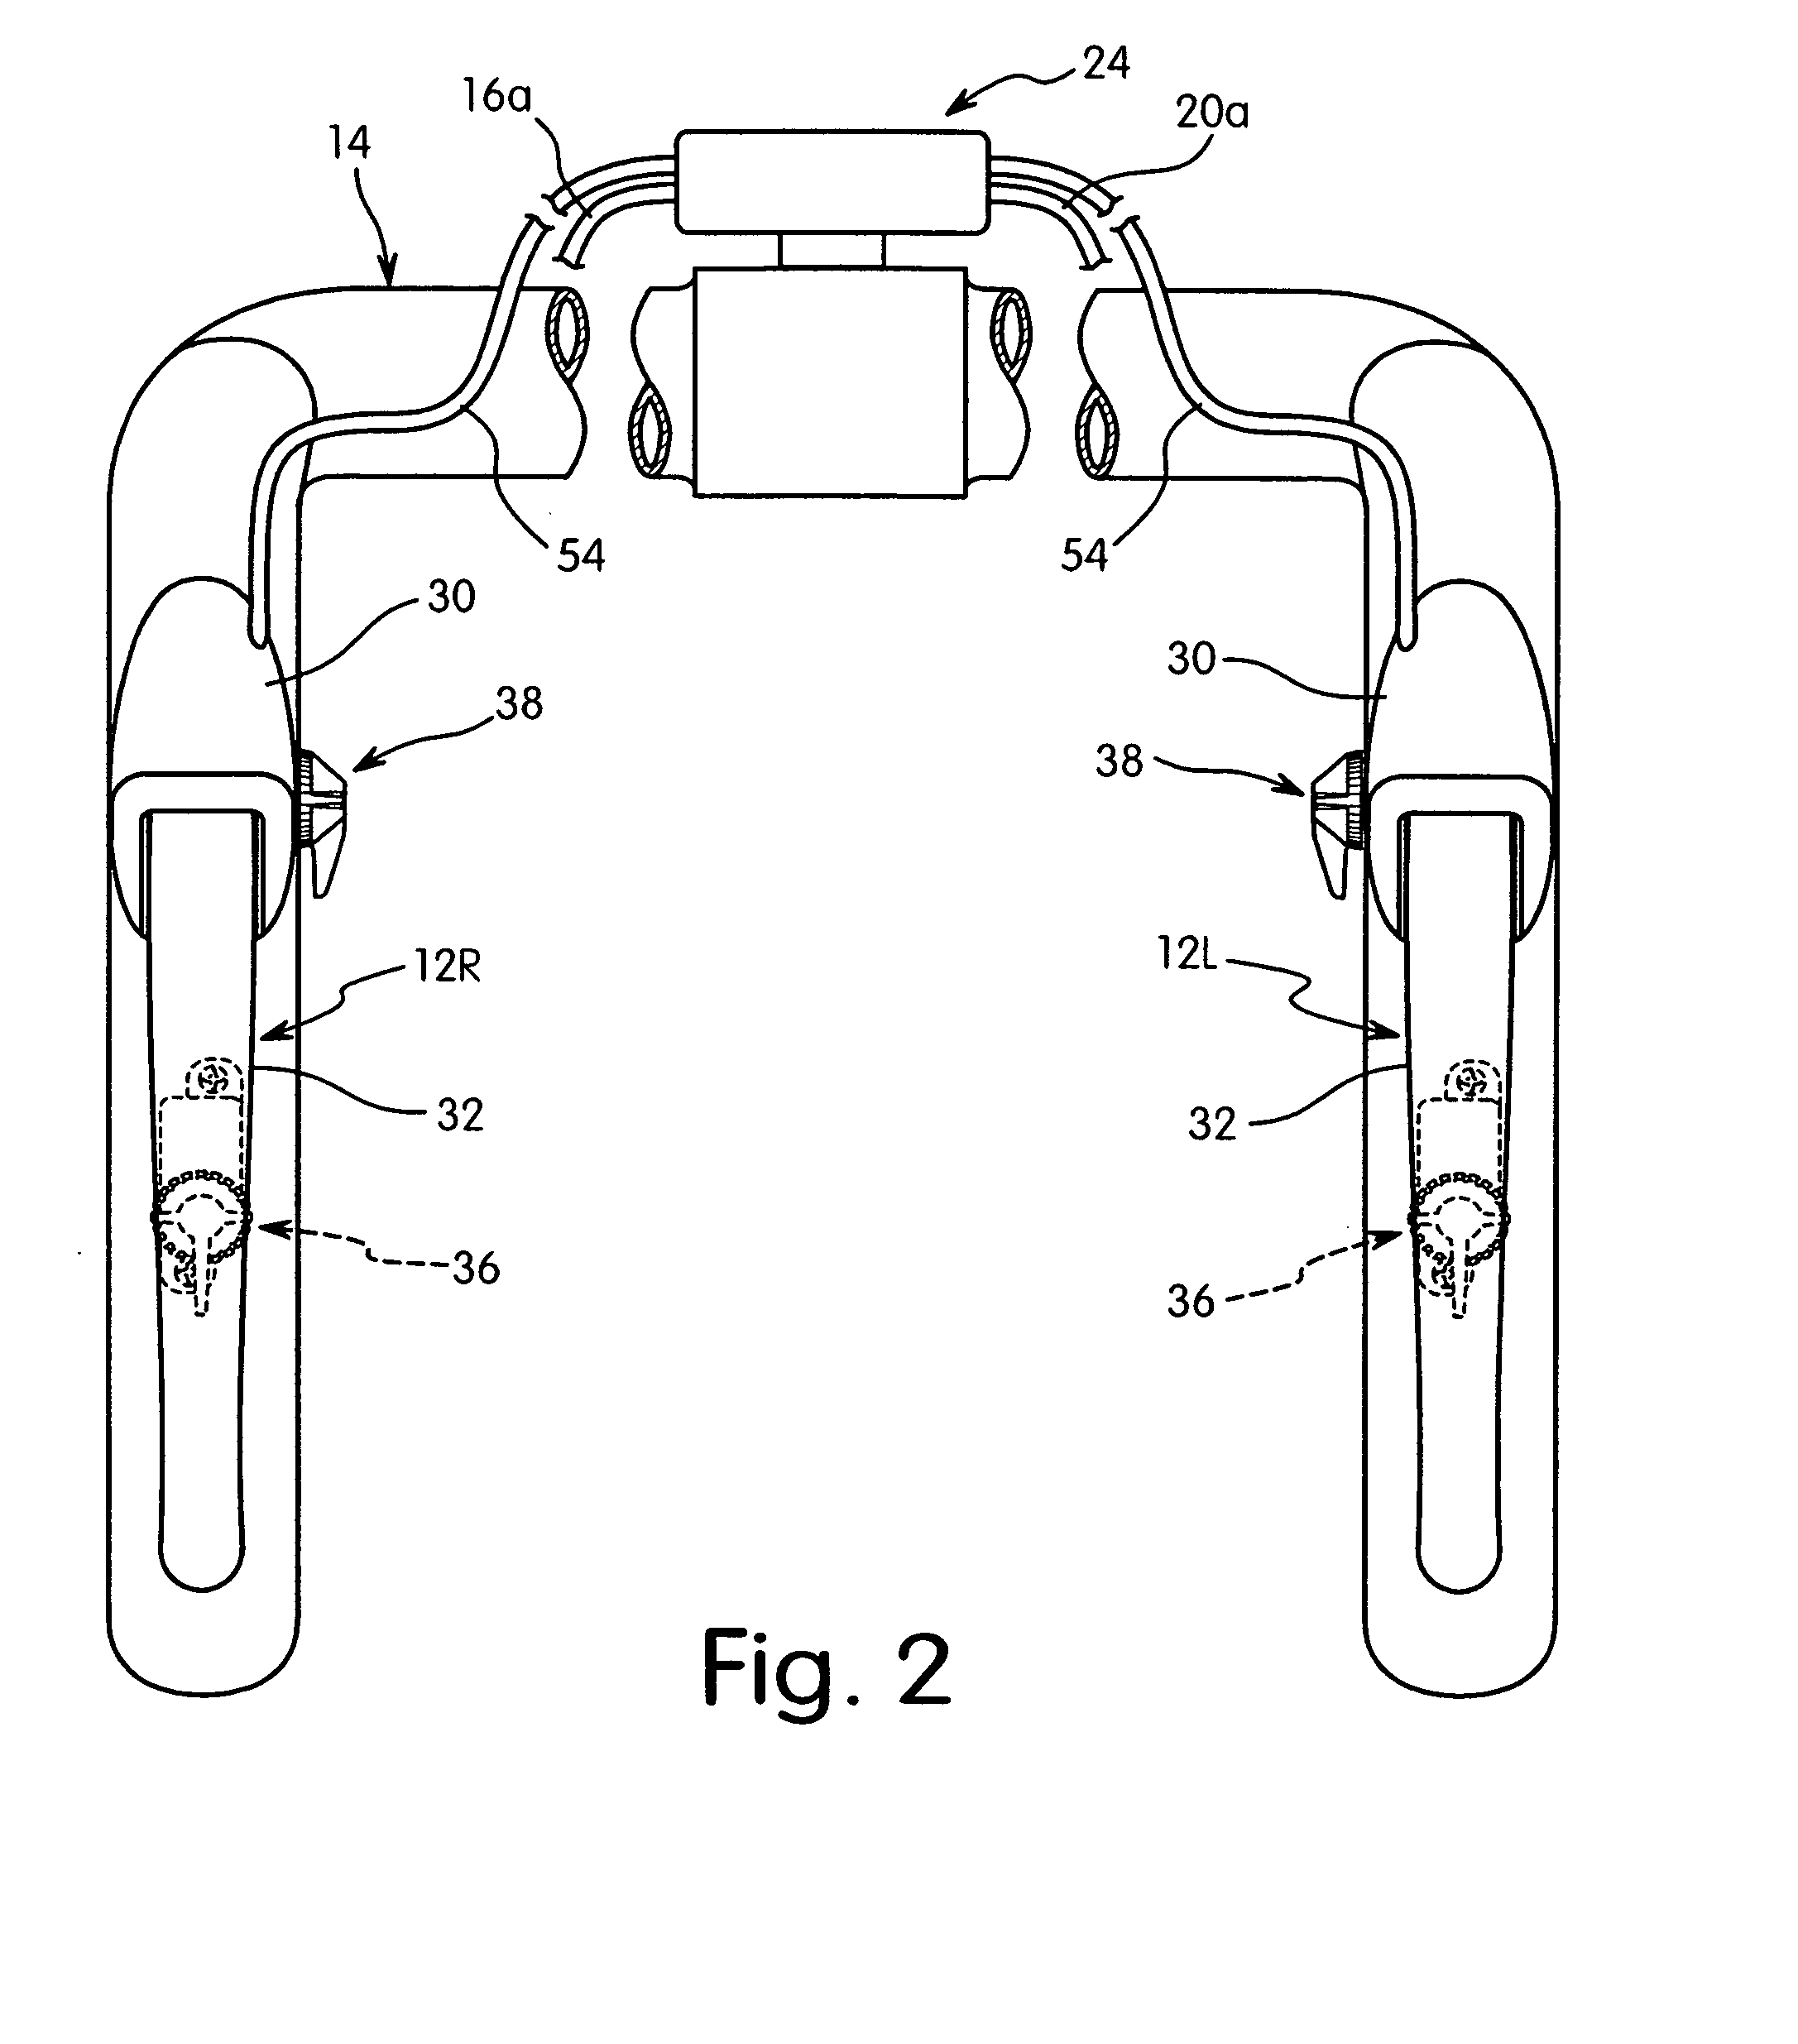 Bicycle operating component with electrical shift control switch